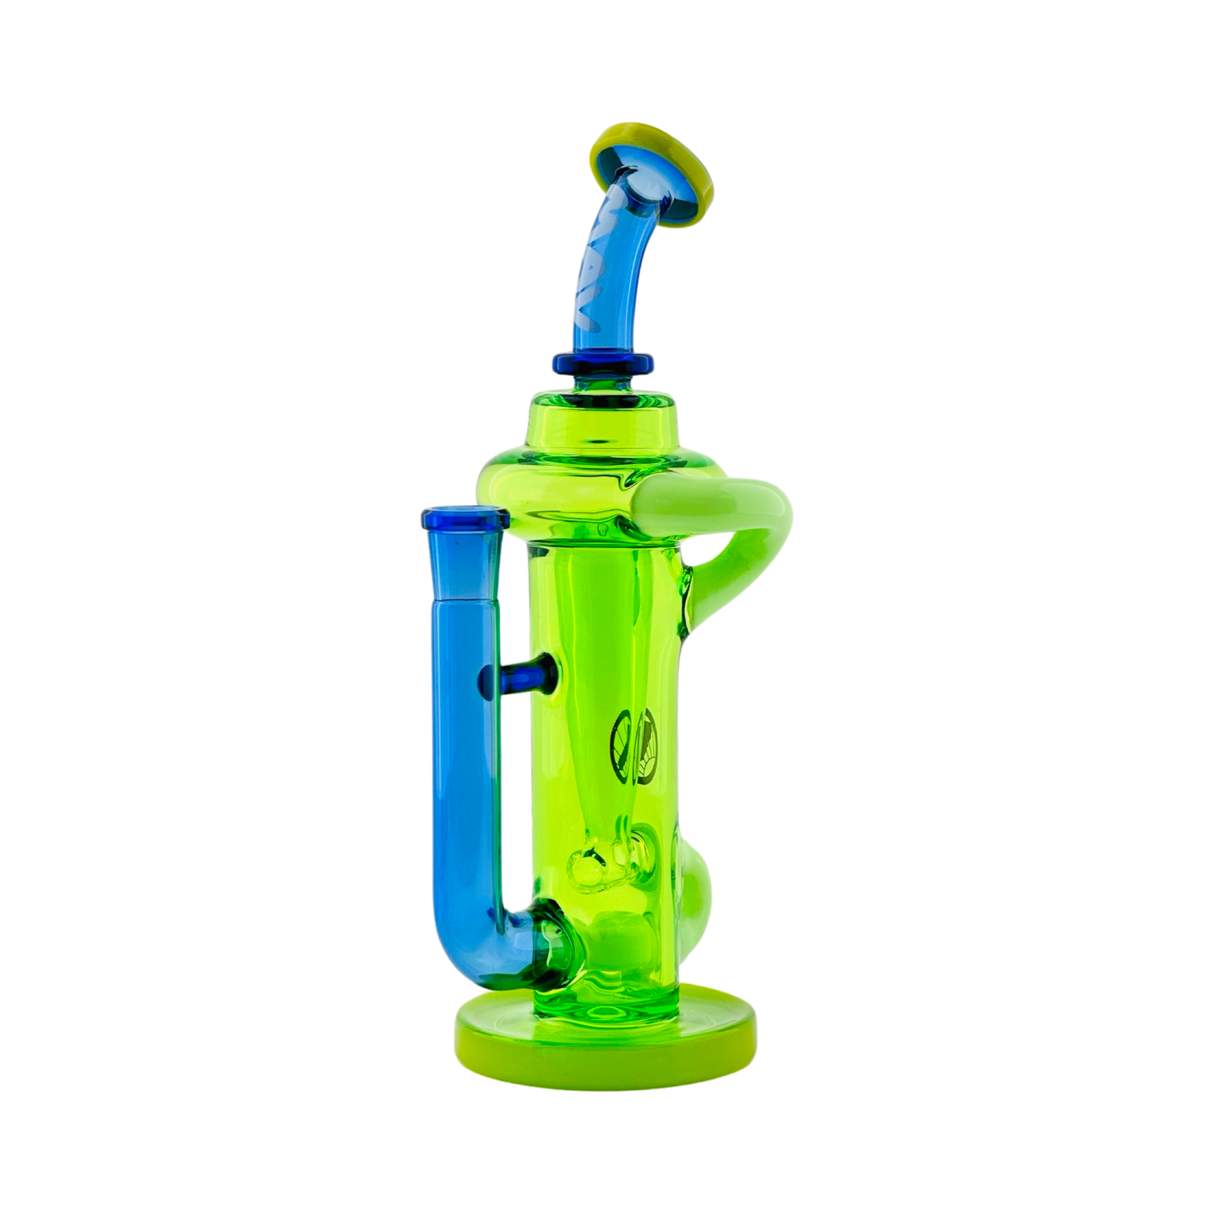 MAV Glass Trestle Recycler Dab Rig in vibrant green and blue color combo, front view on white background